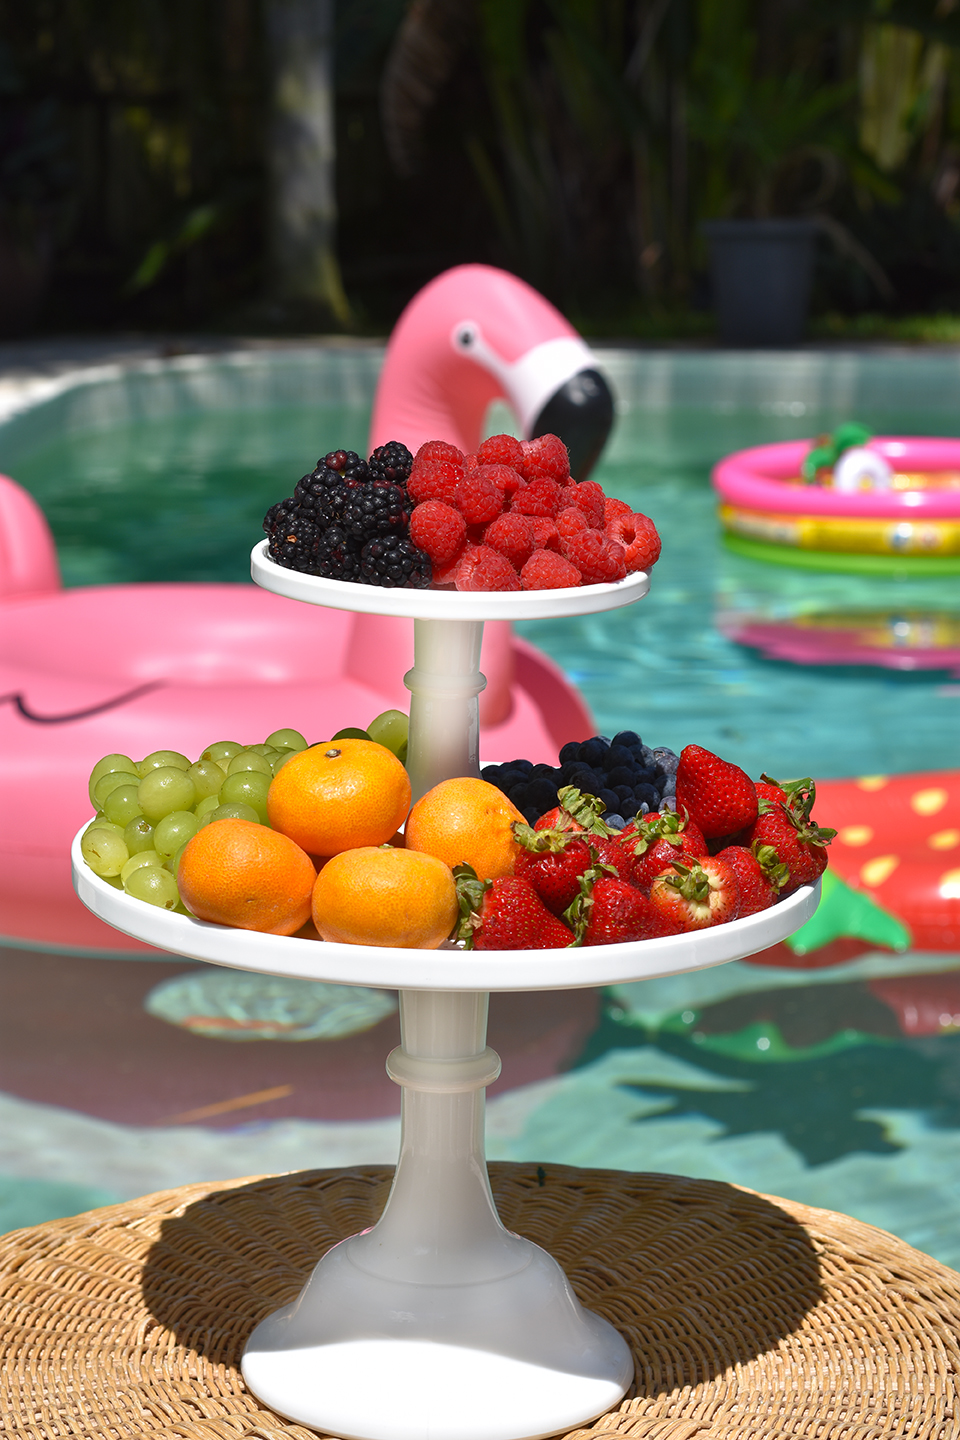 Snacks for an adult pool party, Pool party ideas for adults, backyard pool party ideas for adults, pool party for adults ideas 